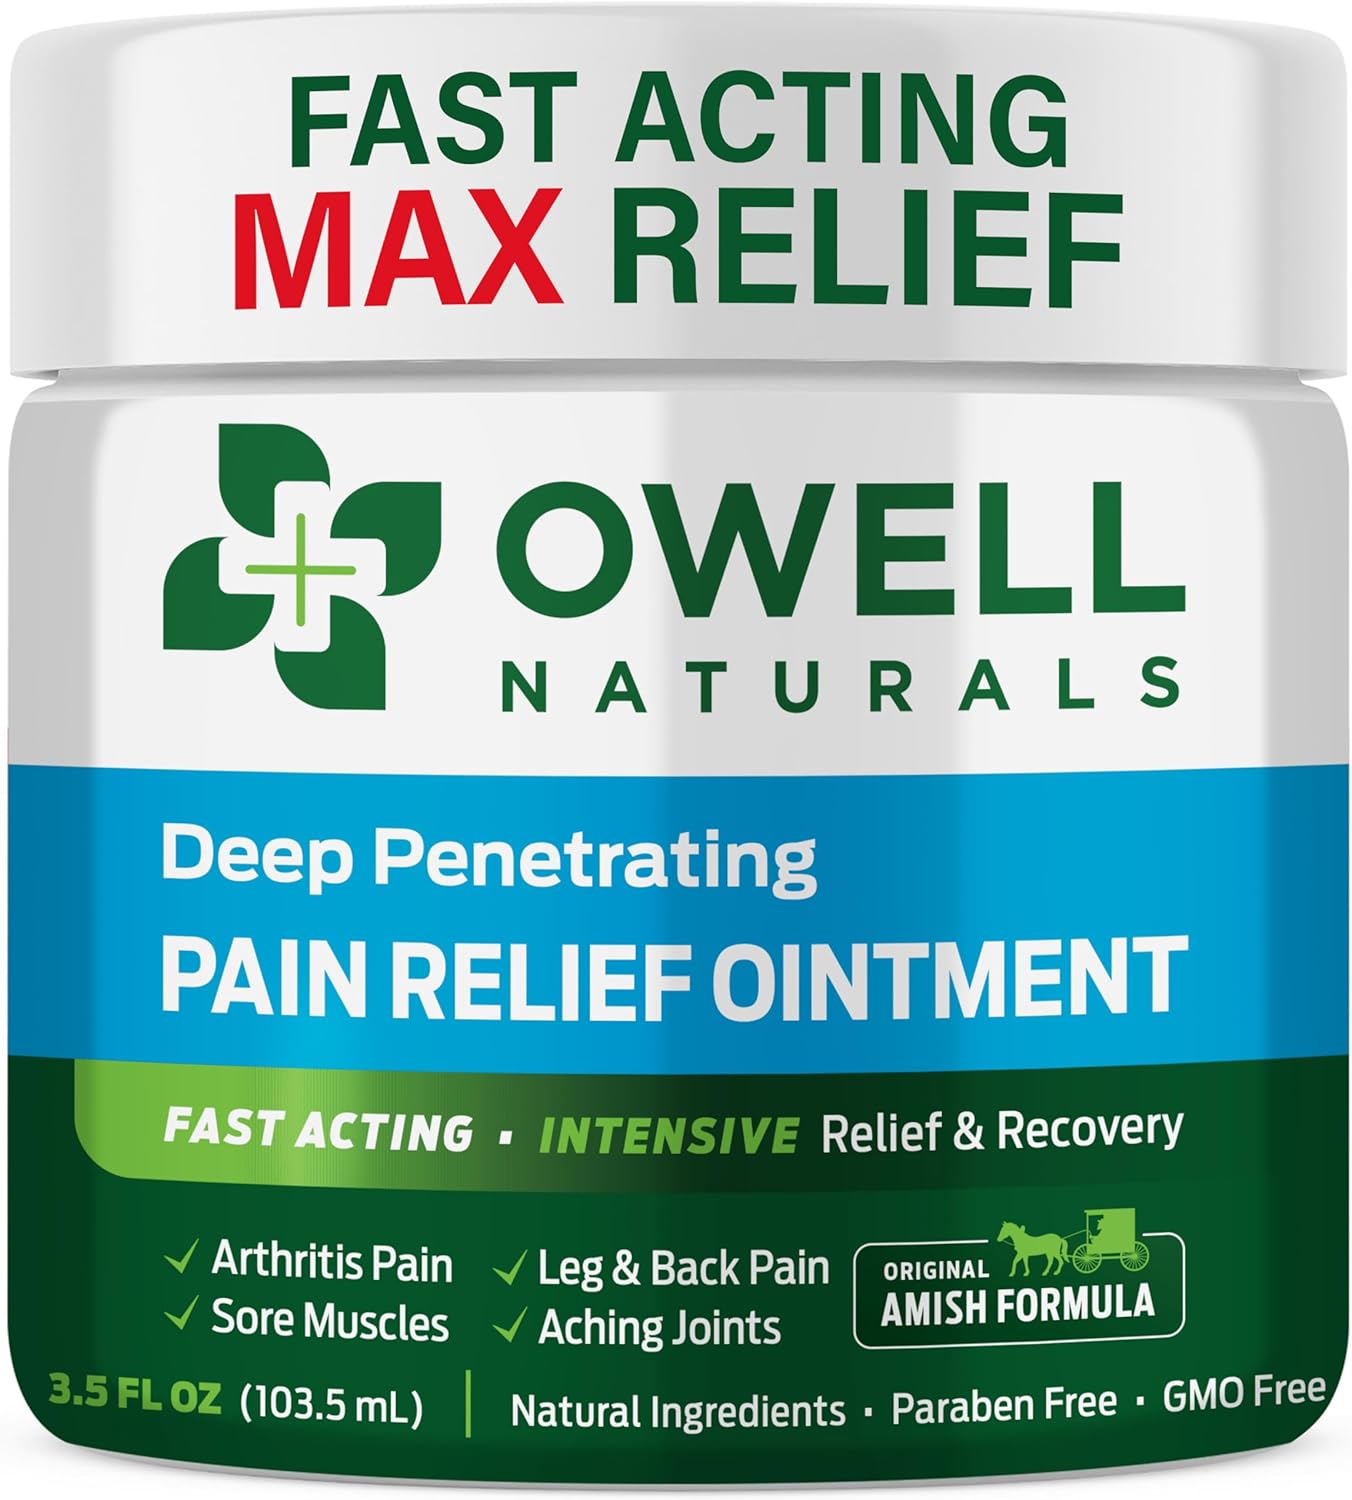 OWELL NATURALS Pain Relief Ointment - 3.5 oz - Maximum Strength All Natural Discomfort Reliever for Joint, Muscle, Knee, Back, Neuropathy - 5 Powerful Ingredients